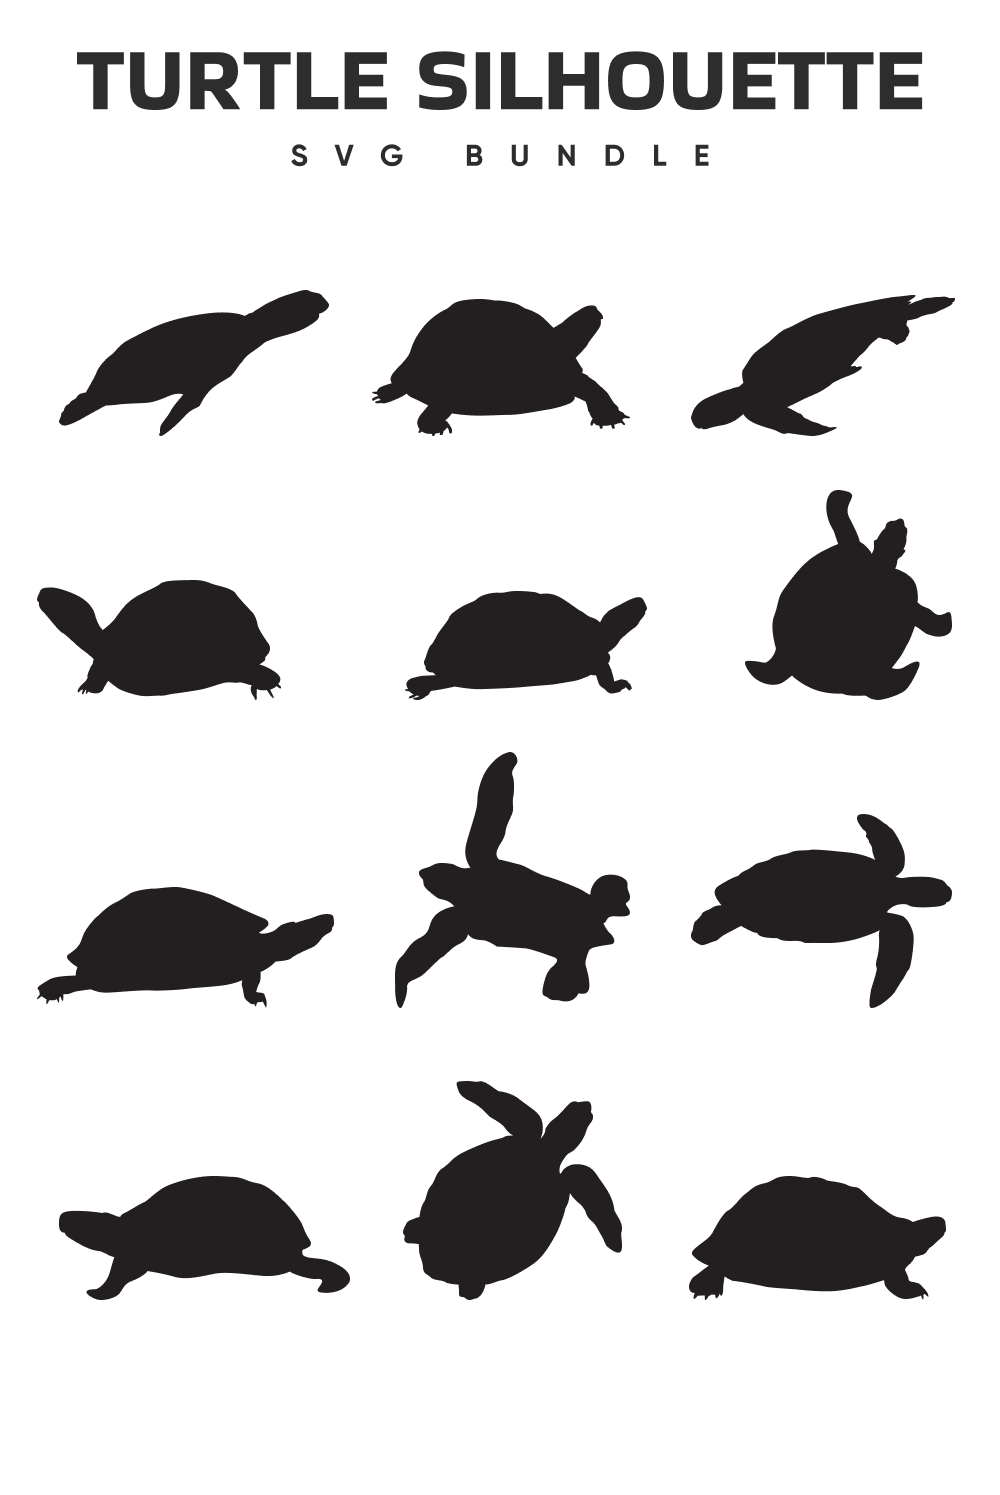 The silhouettes of turtles are shown in black and white.